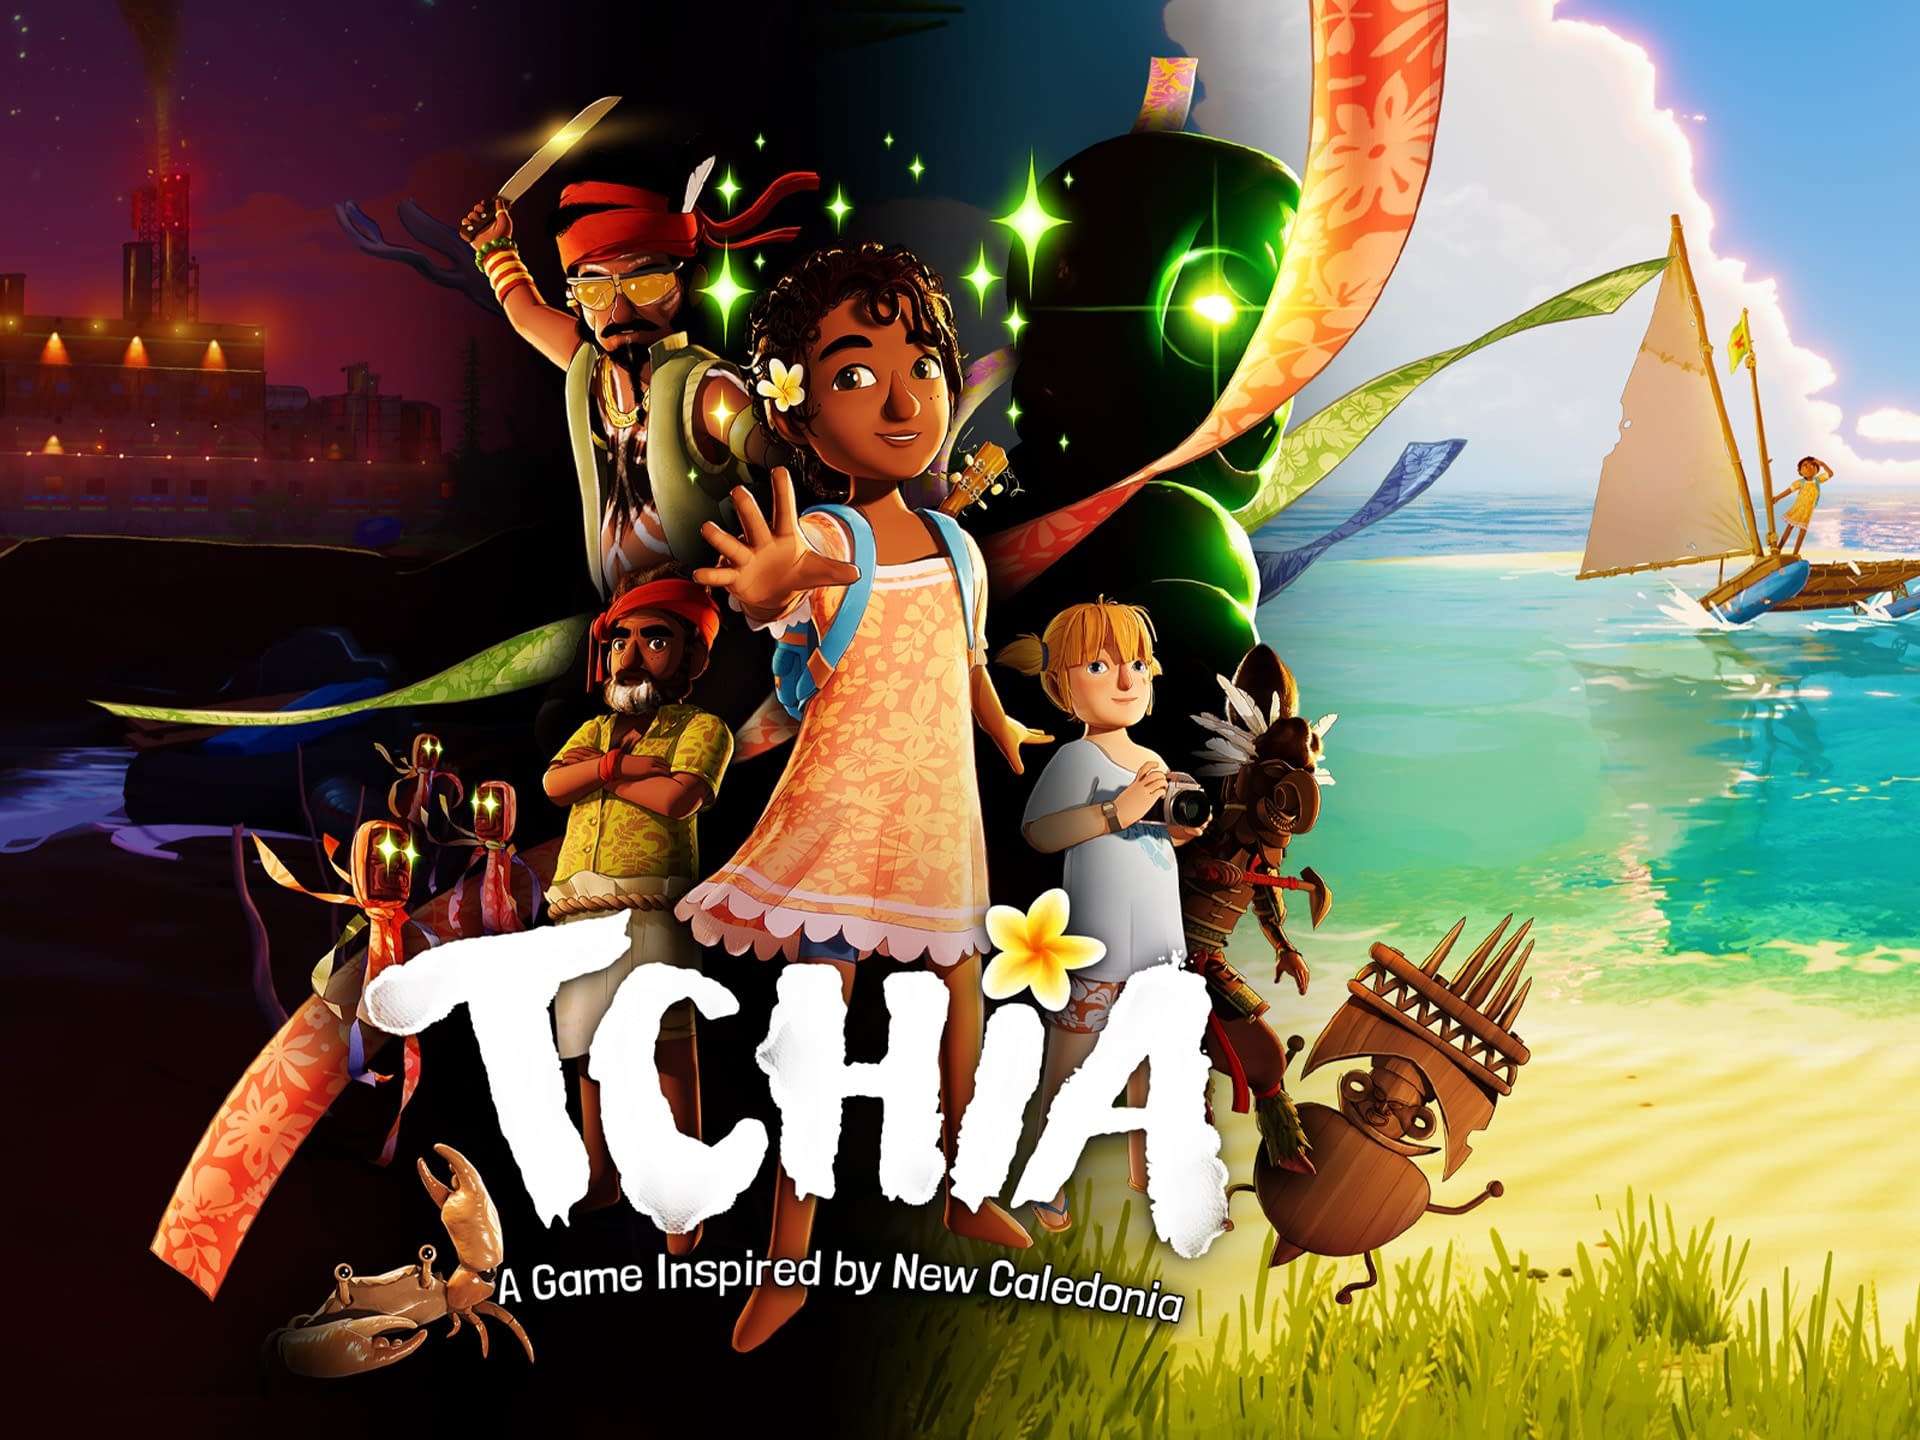 Adventure Game Tchia comes on 21 March